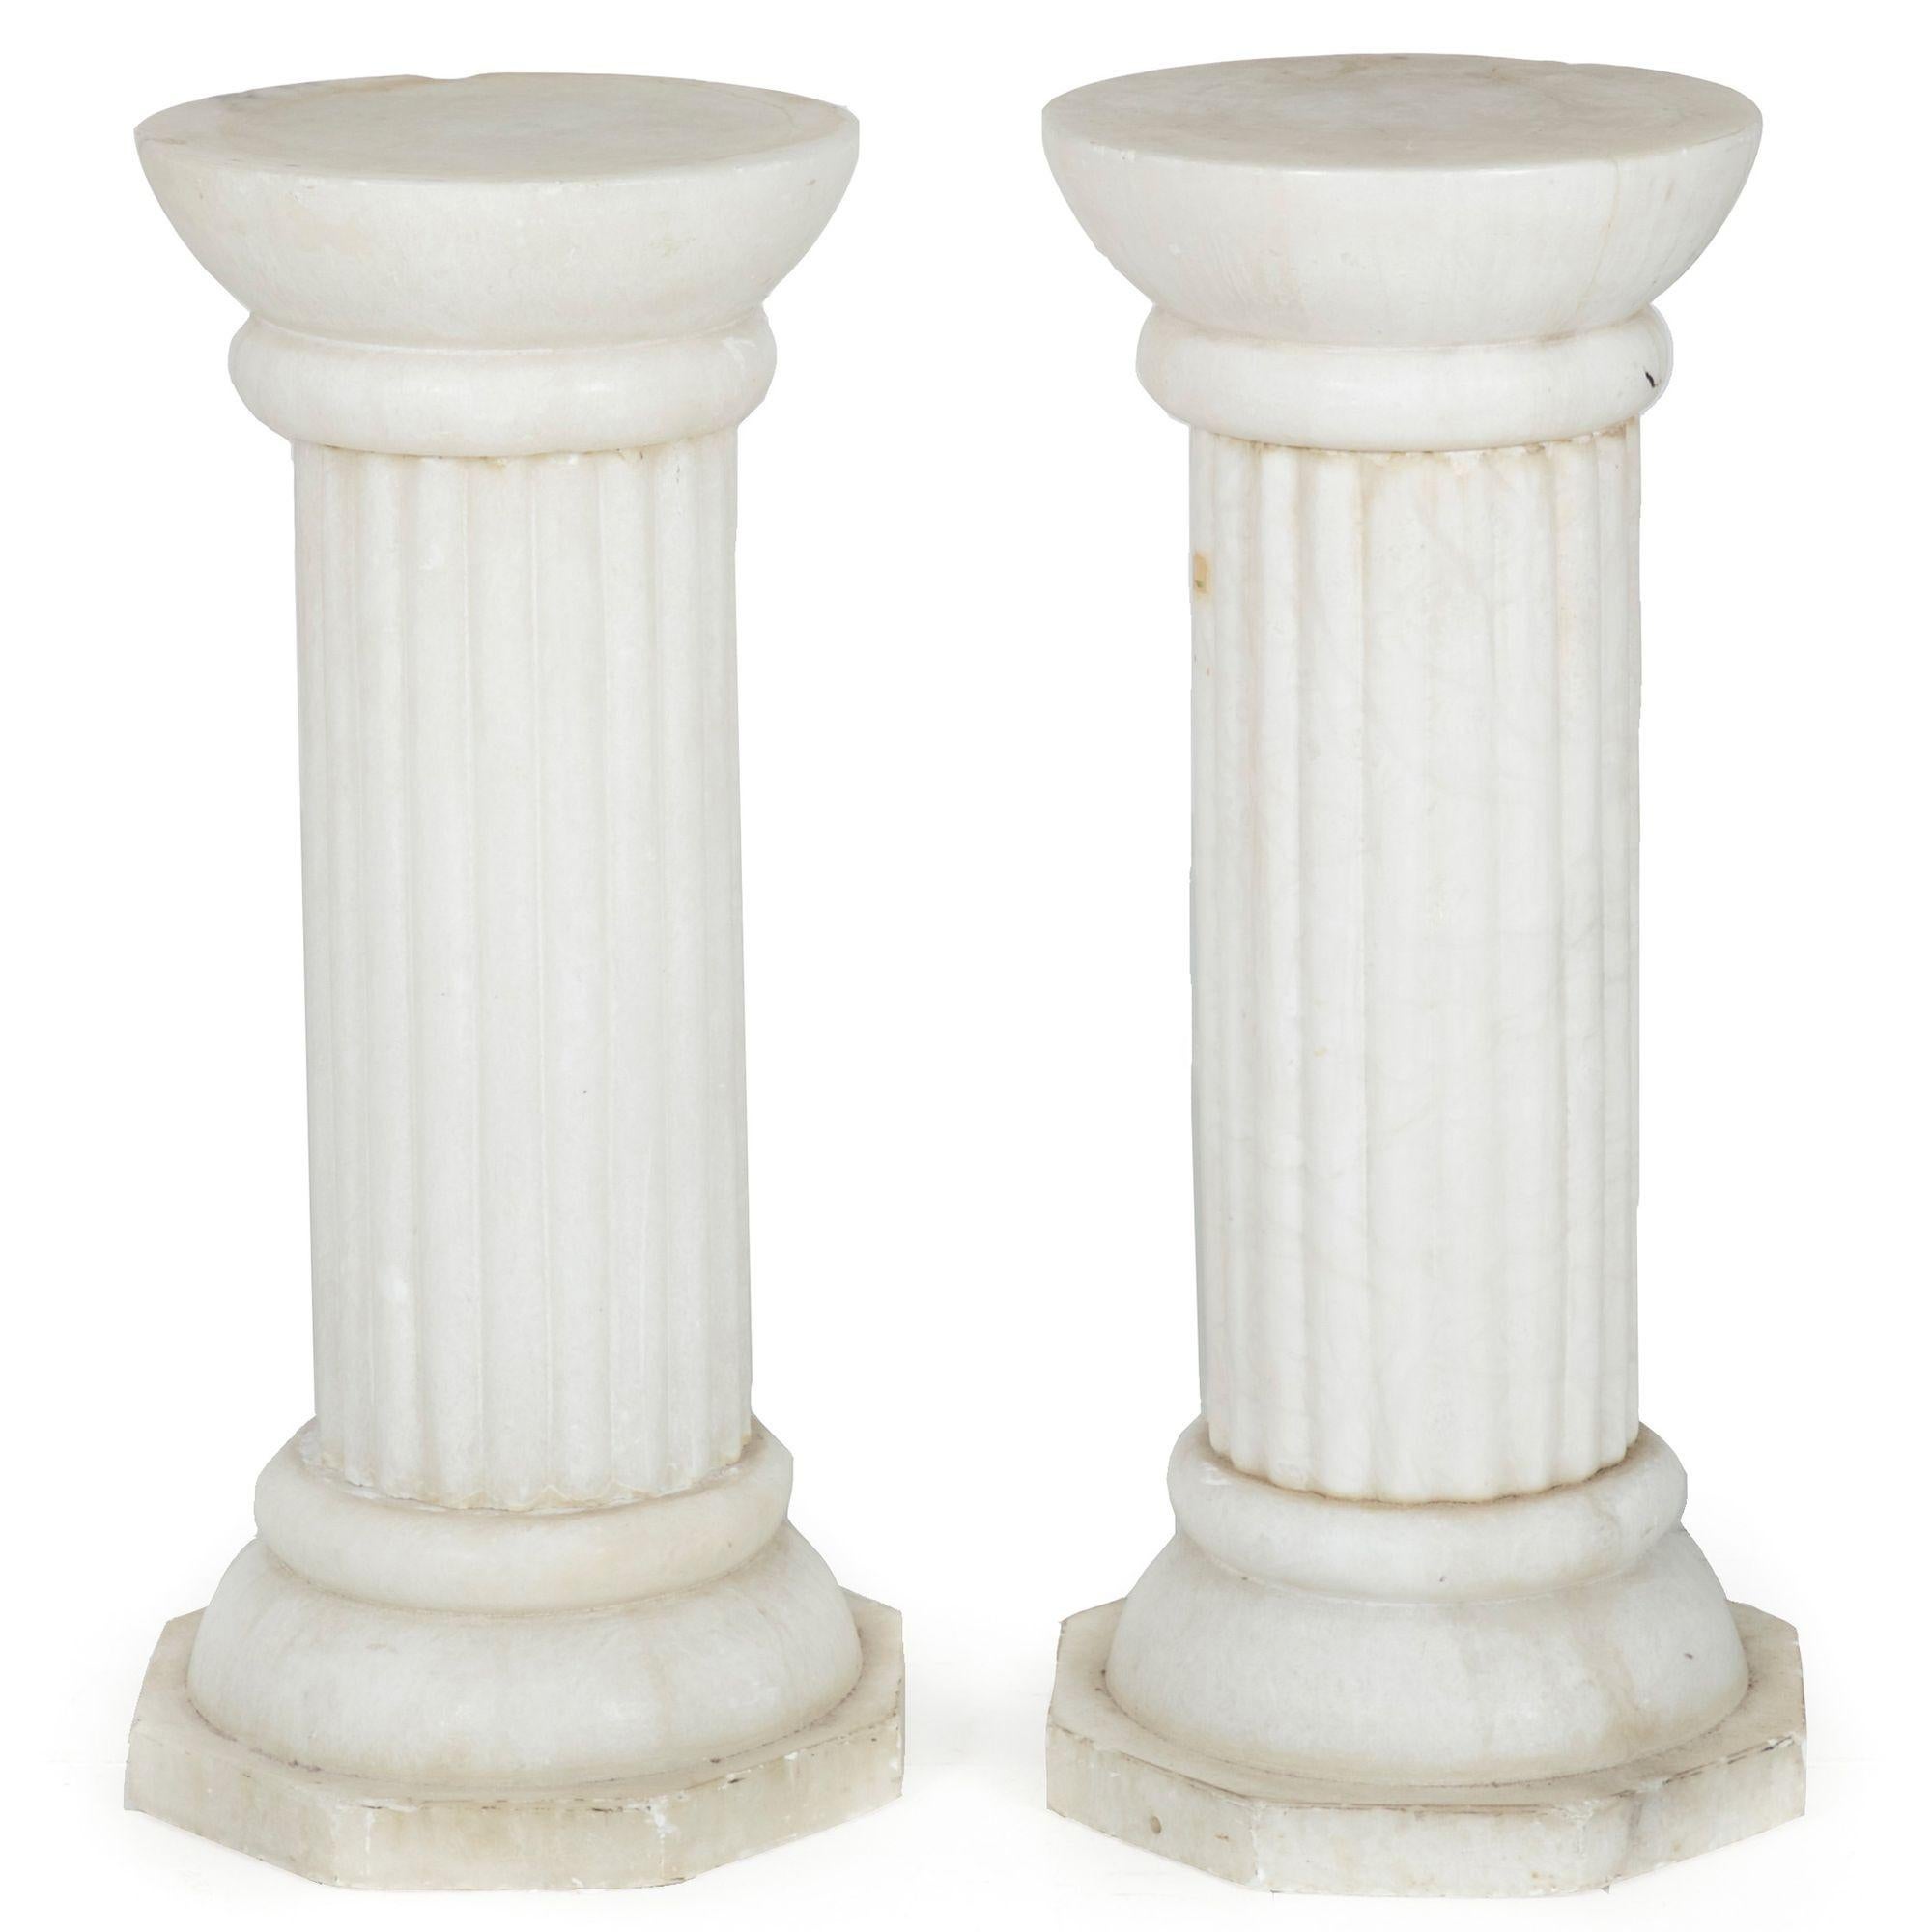 A very nice pair of aged marble pedestals of an attractively restrained size, they are just over 26